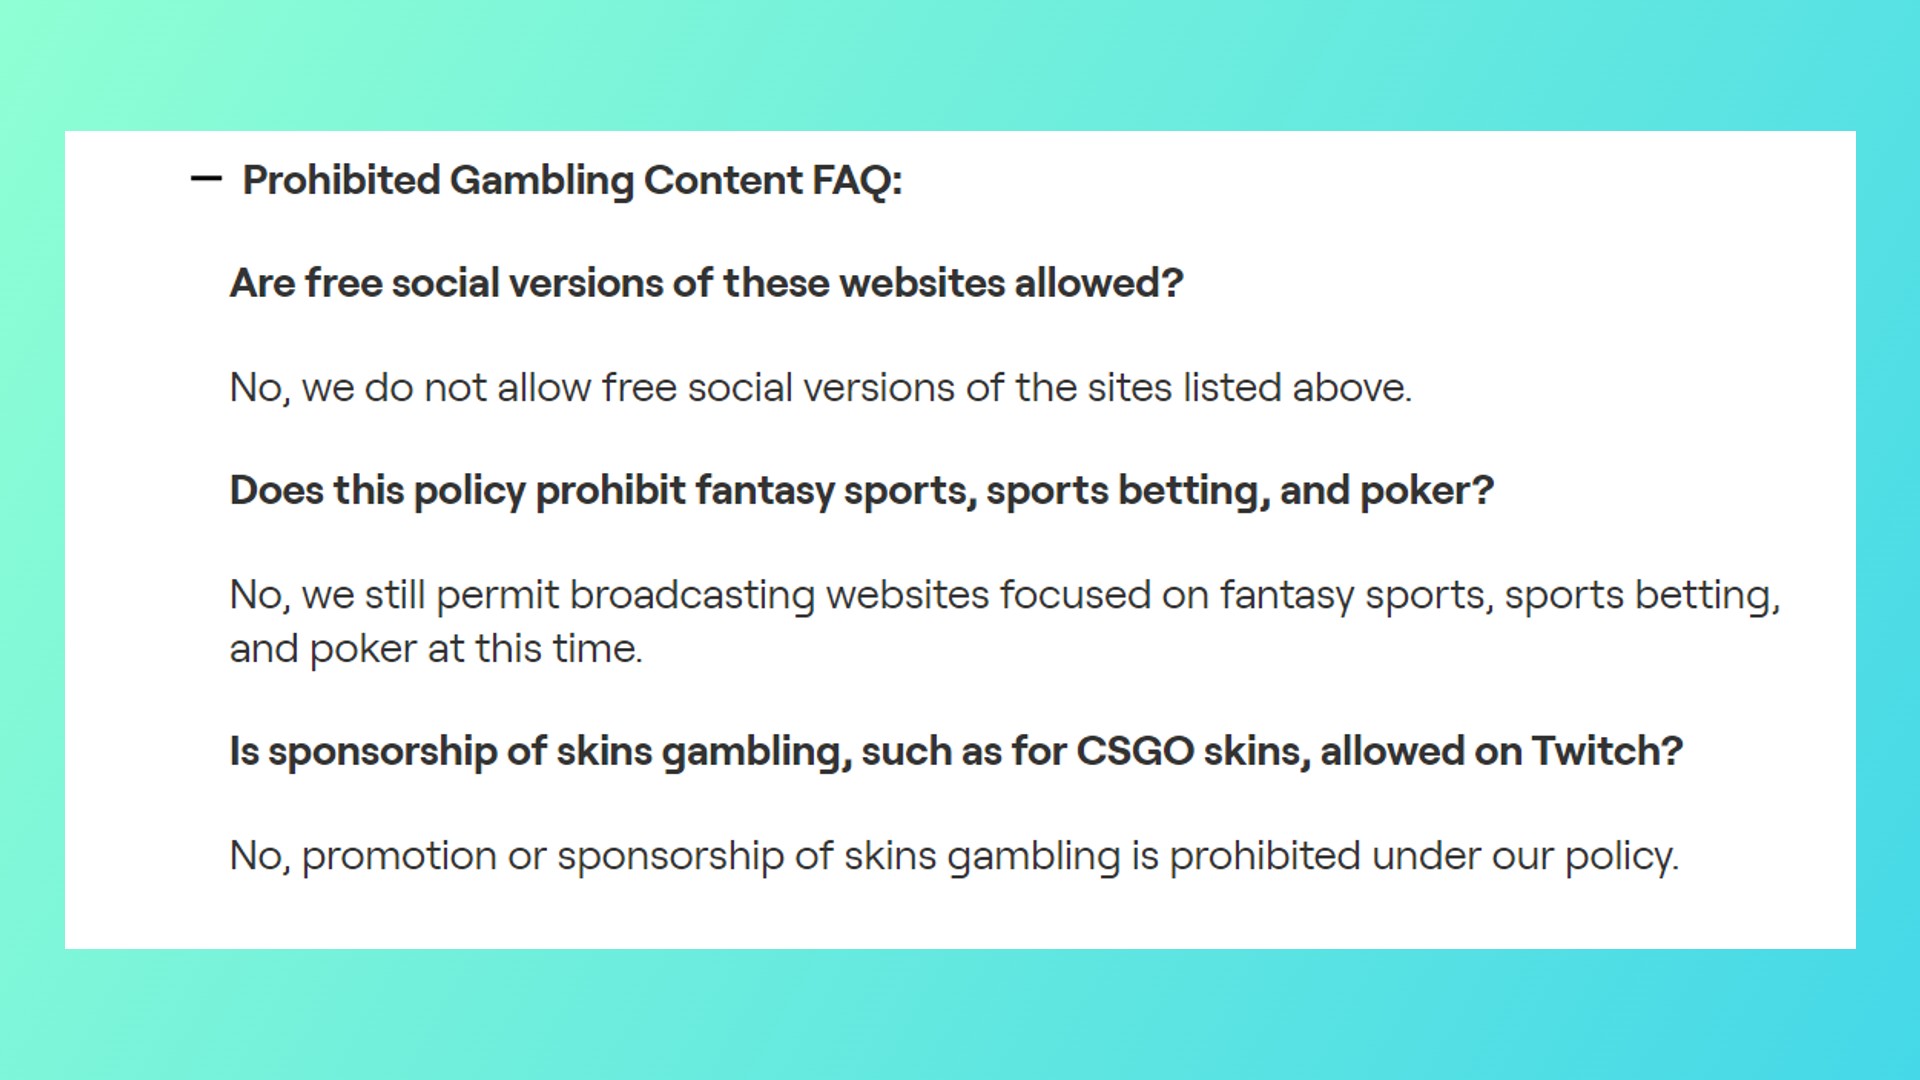 CSGO Twitch gambling: A screenshot of Twitch guidelines for Valve FPS game CSGO